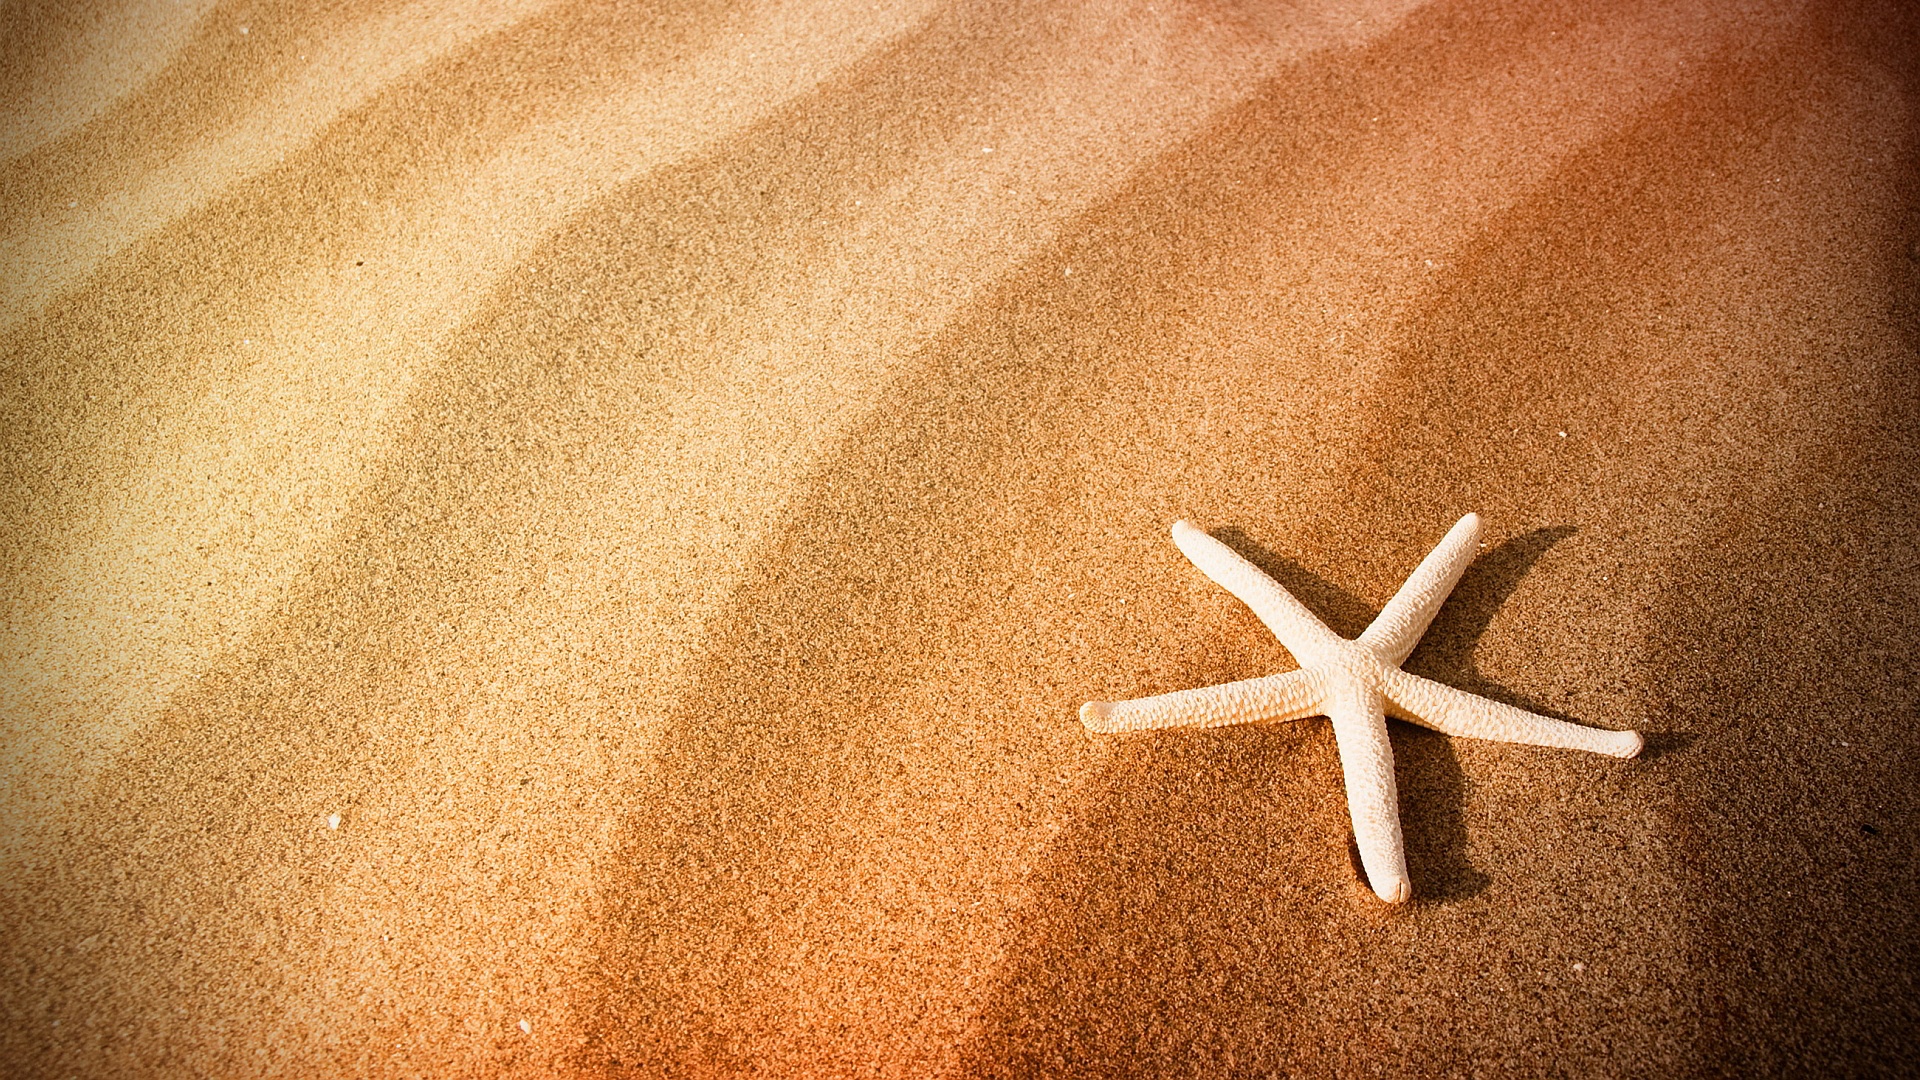 Free download Beach Sand Starfish Wallpaper In 1920X1080 Chainimage  [1920x1080] for your Desktop, Mobile & Tablet | Explore 32+ Sand Cartoon  Wallpapers | Sand Dunes Wallpaper, Sand Beach Wallpaper, Beach Sand  Wallpaper